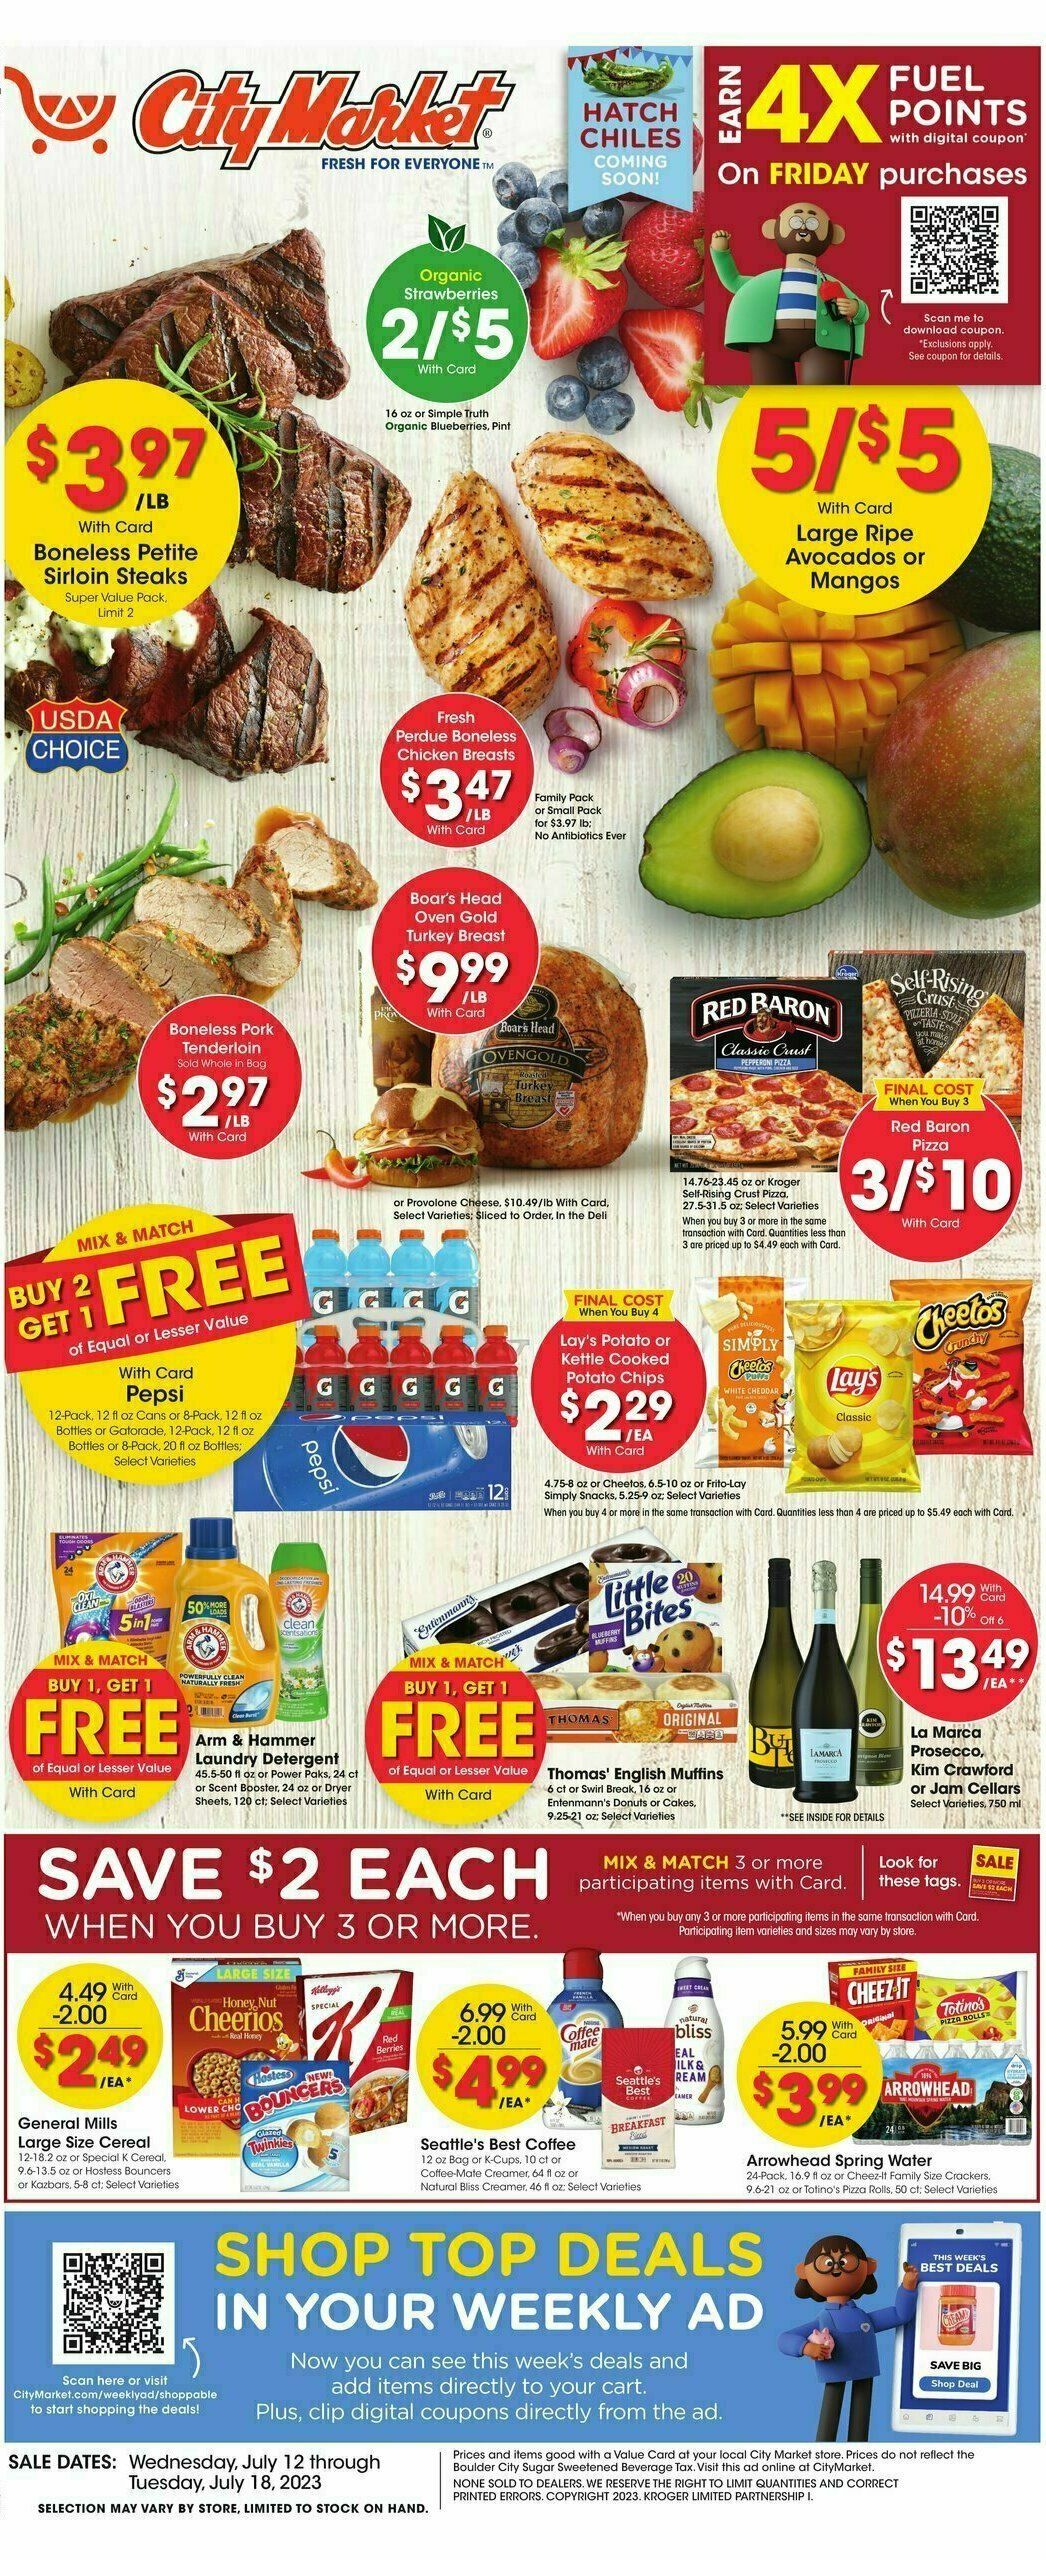 City Market Weekly Ad from July 12